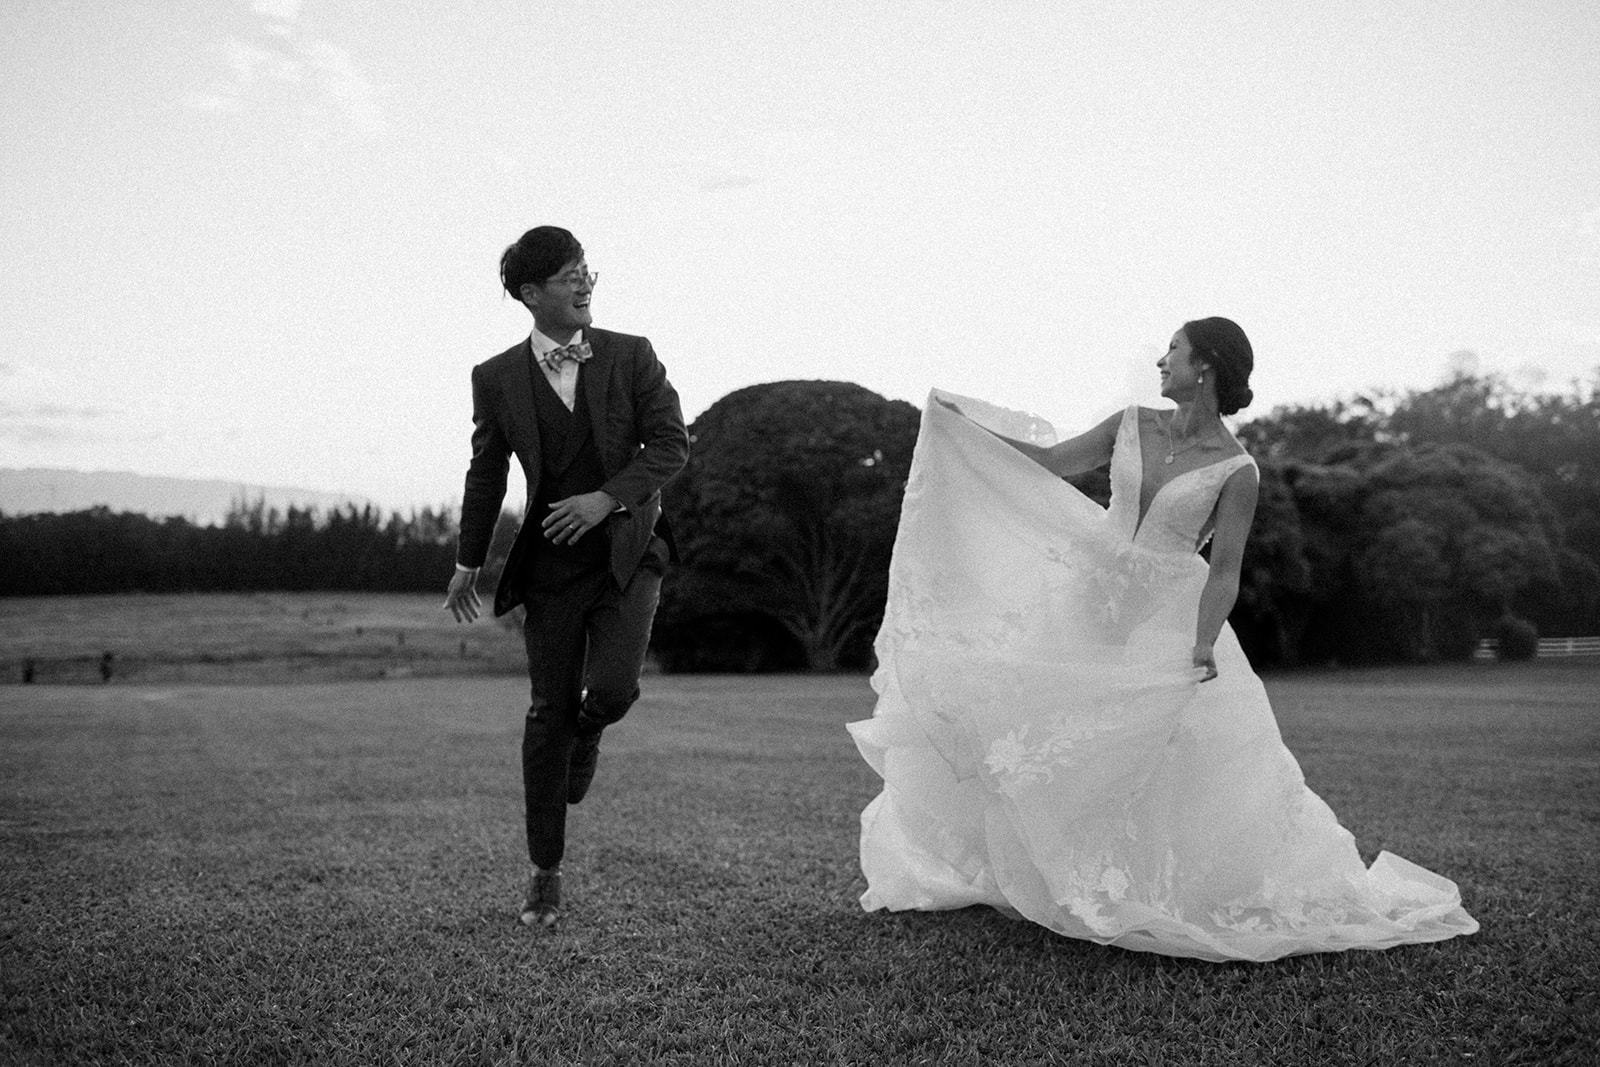 Fun and joy-filled wedding photos from an elopement on North Shore's Sunset Ranch